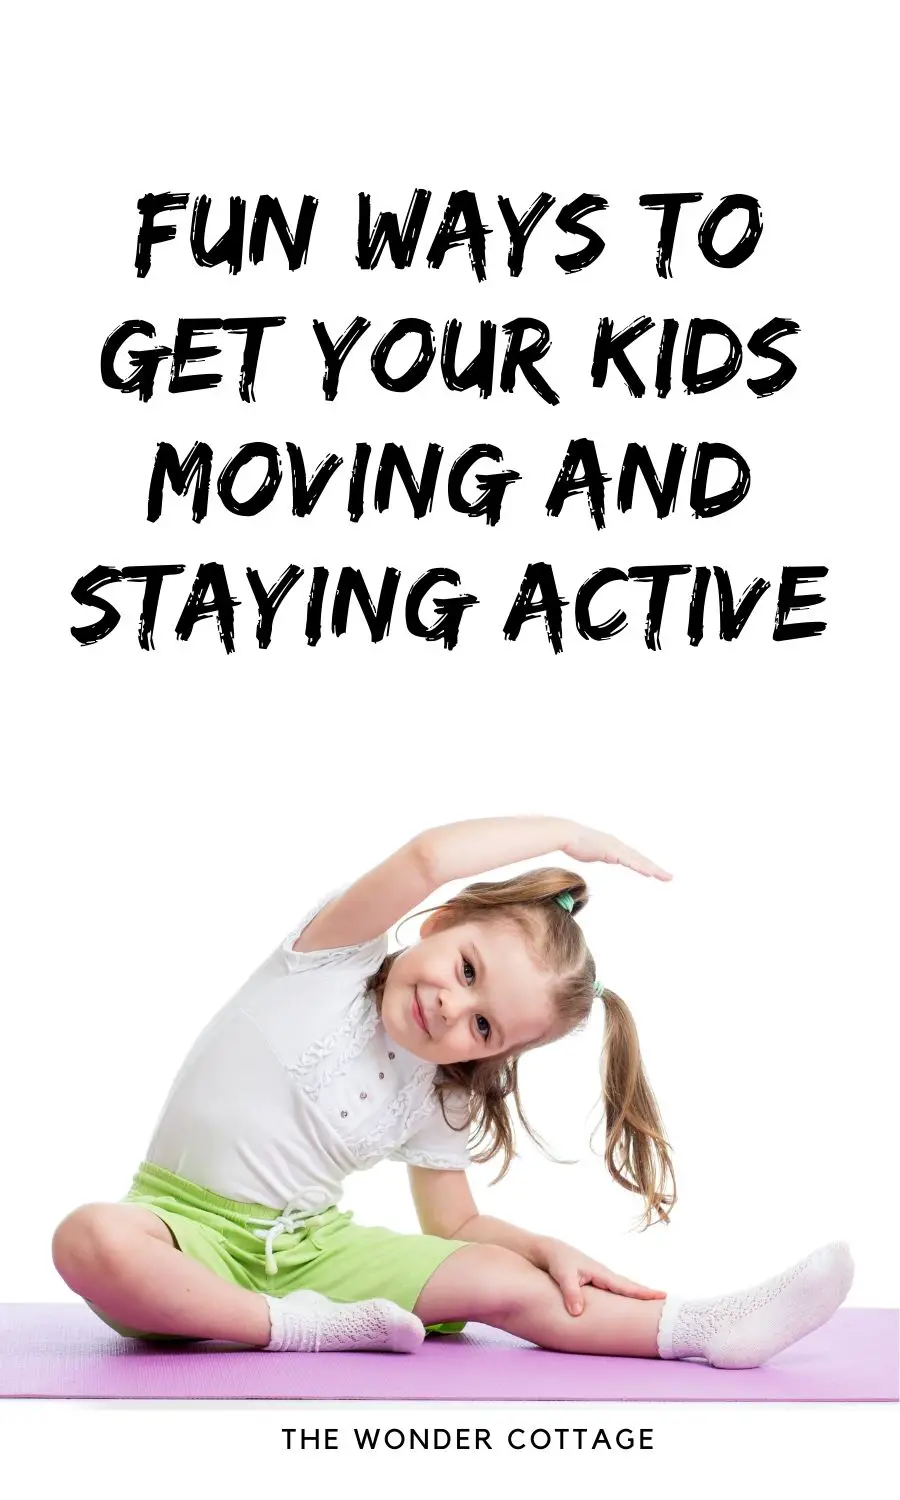 Fun Ways to Get Your Kids Moving and Staying Active